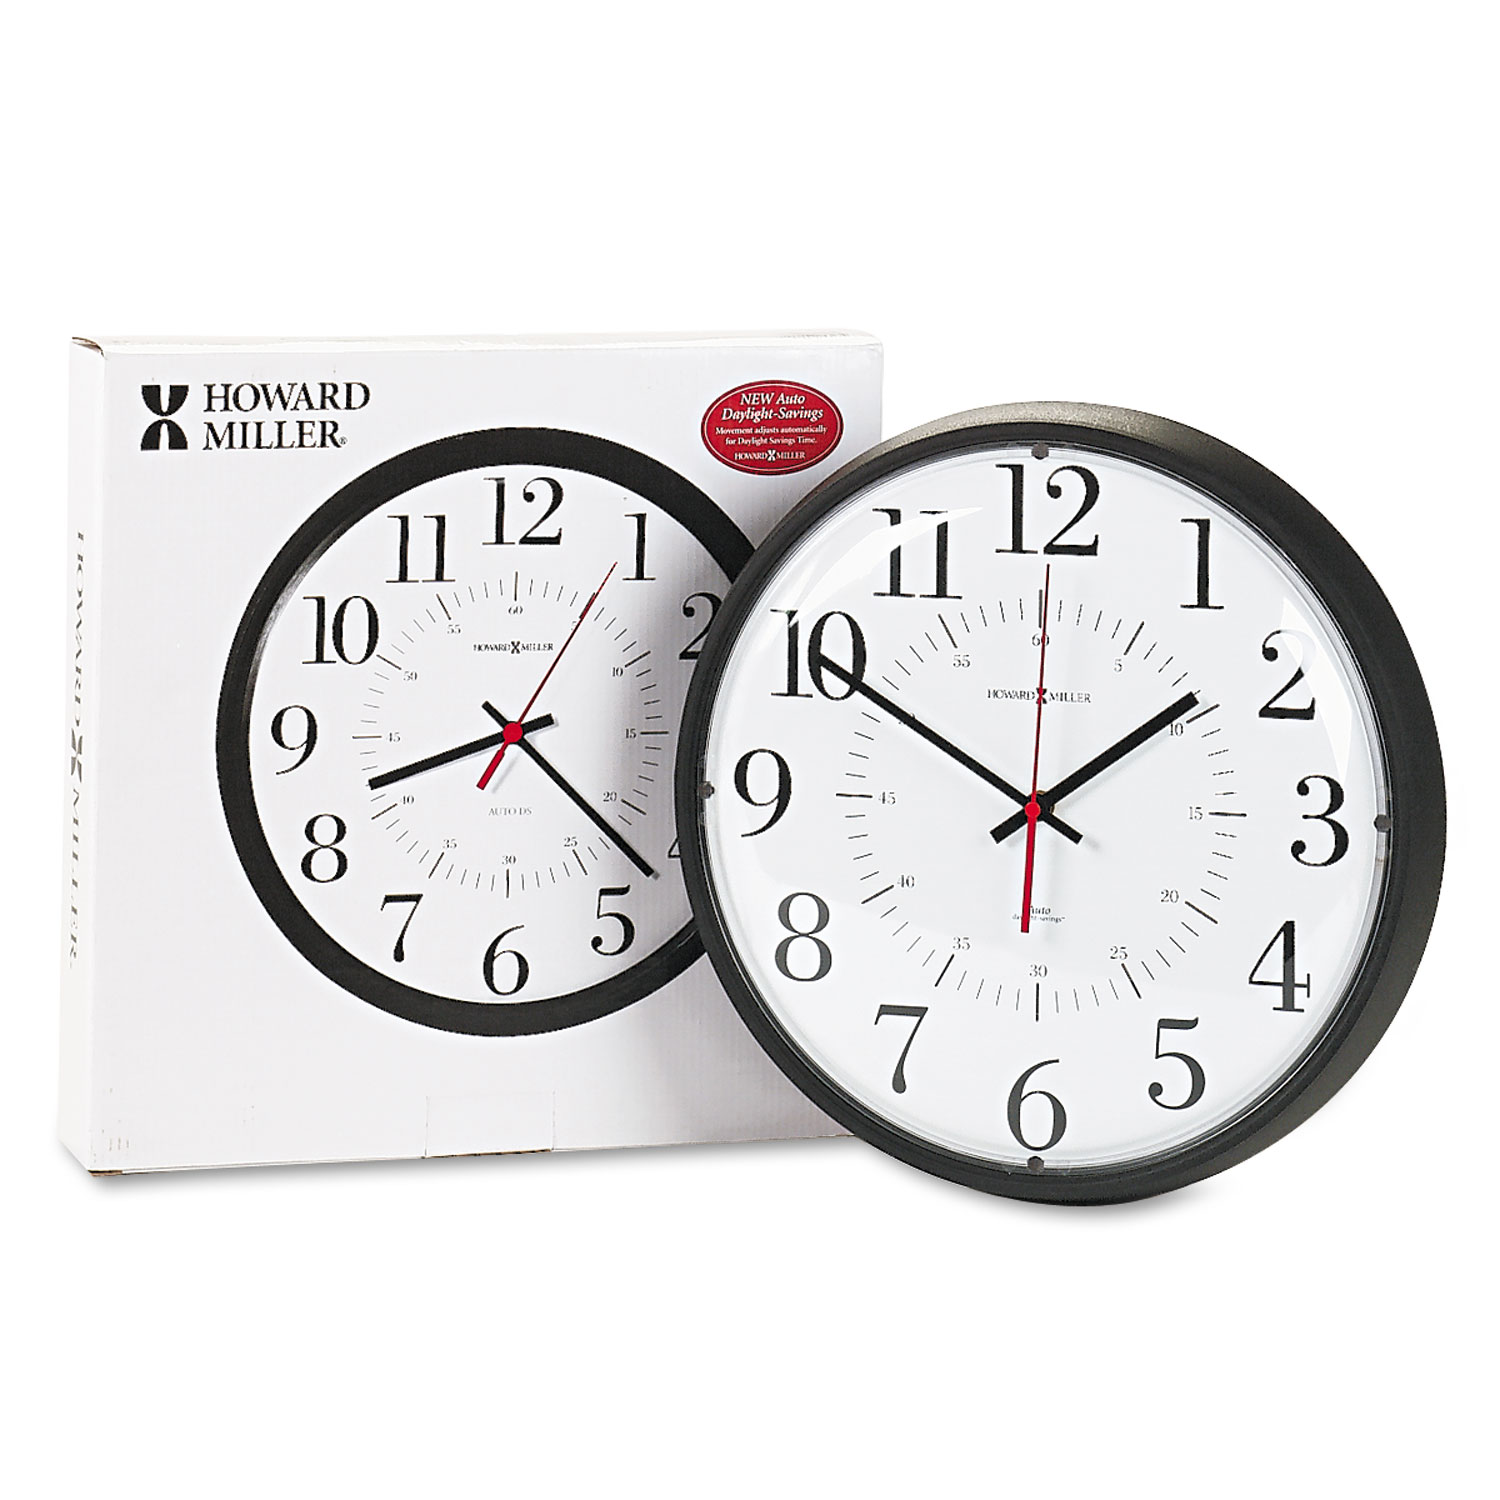  Howard Miller 625-323 Alton Auto Daylight Savings Wall Clock, 14 Overall Diameter, Black Case, 1 AA (sold separately) (MIL625323) 